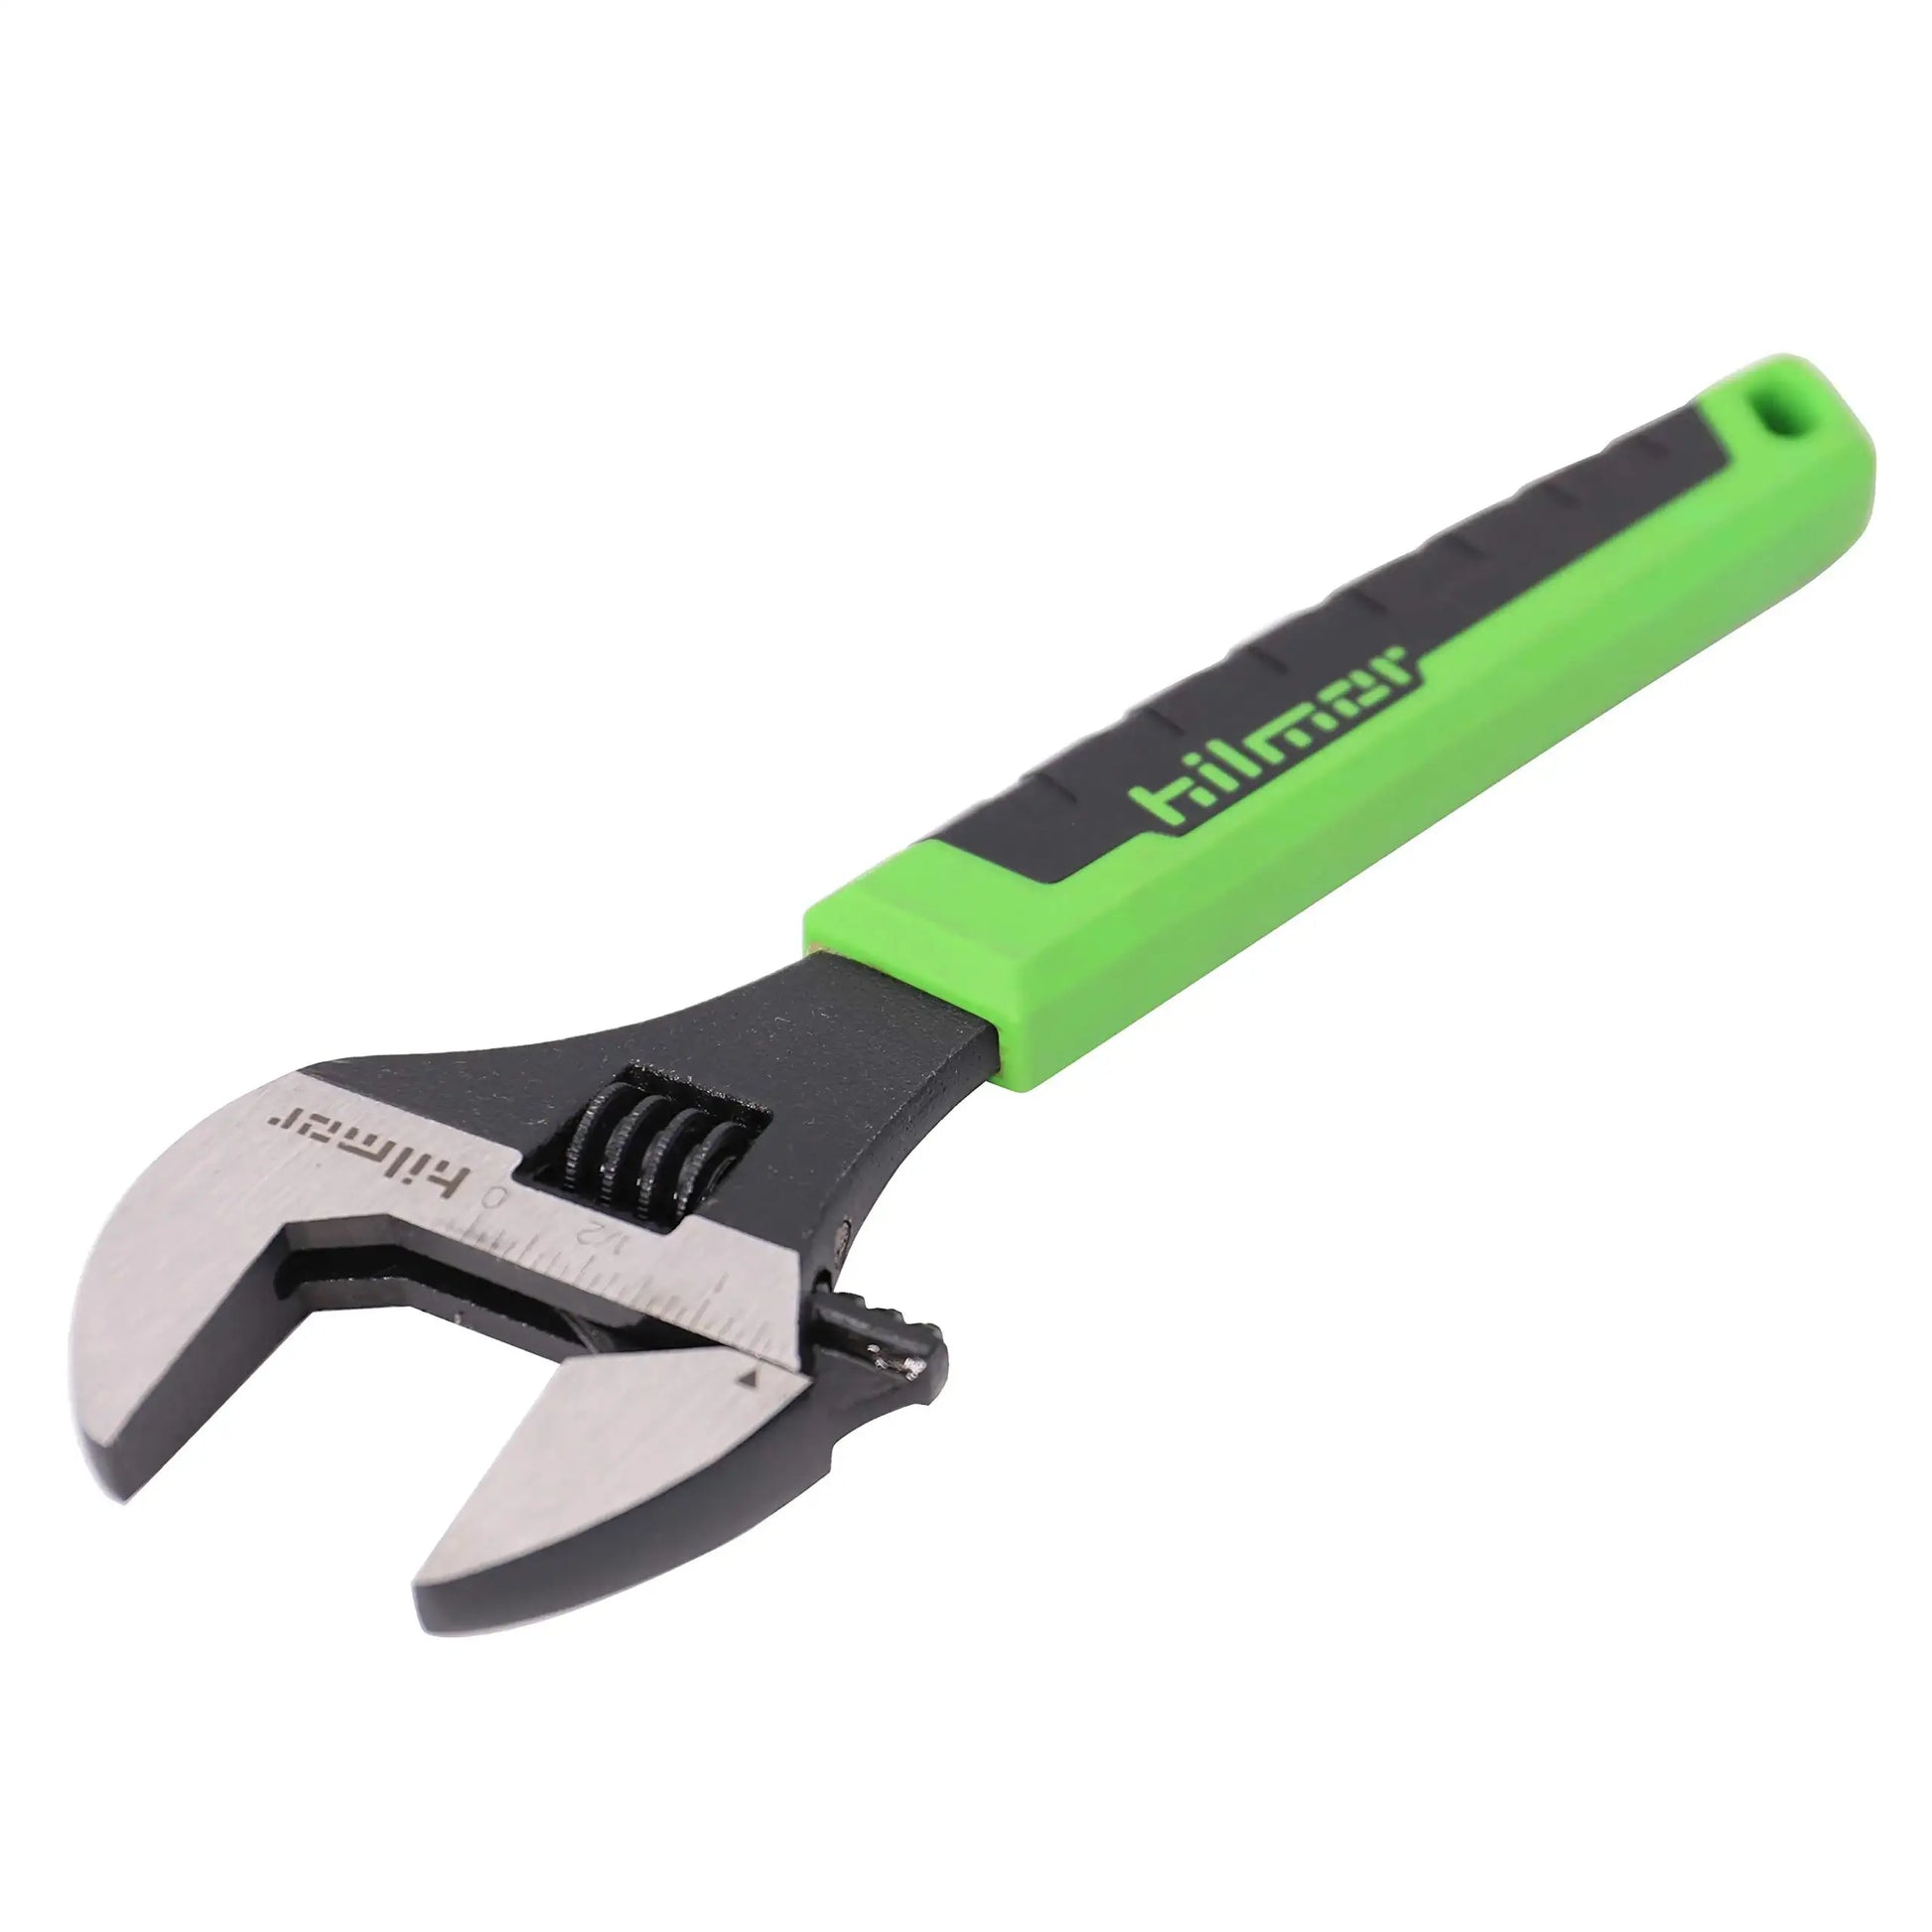 Hilmor 10 Adjustable Crescent Wrench with Rubber Handle Grip, Black & Green, AW10 1885421 Fifth